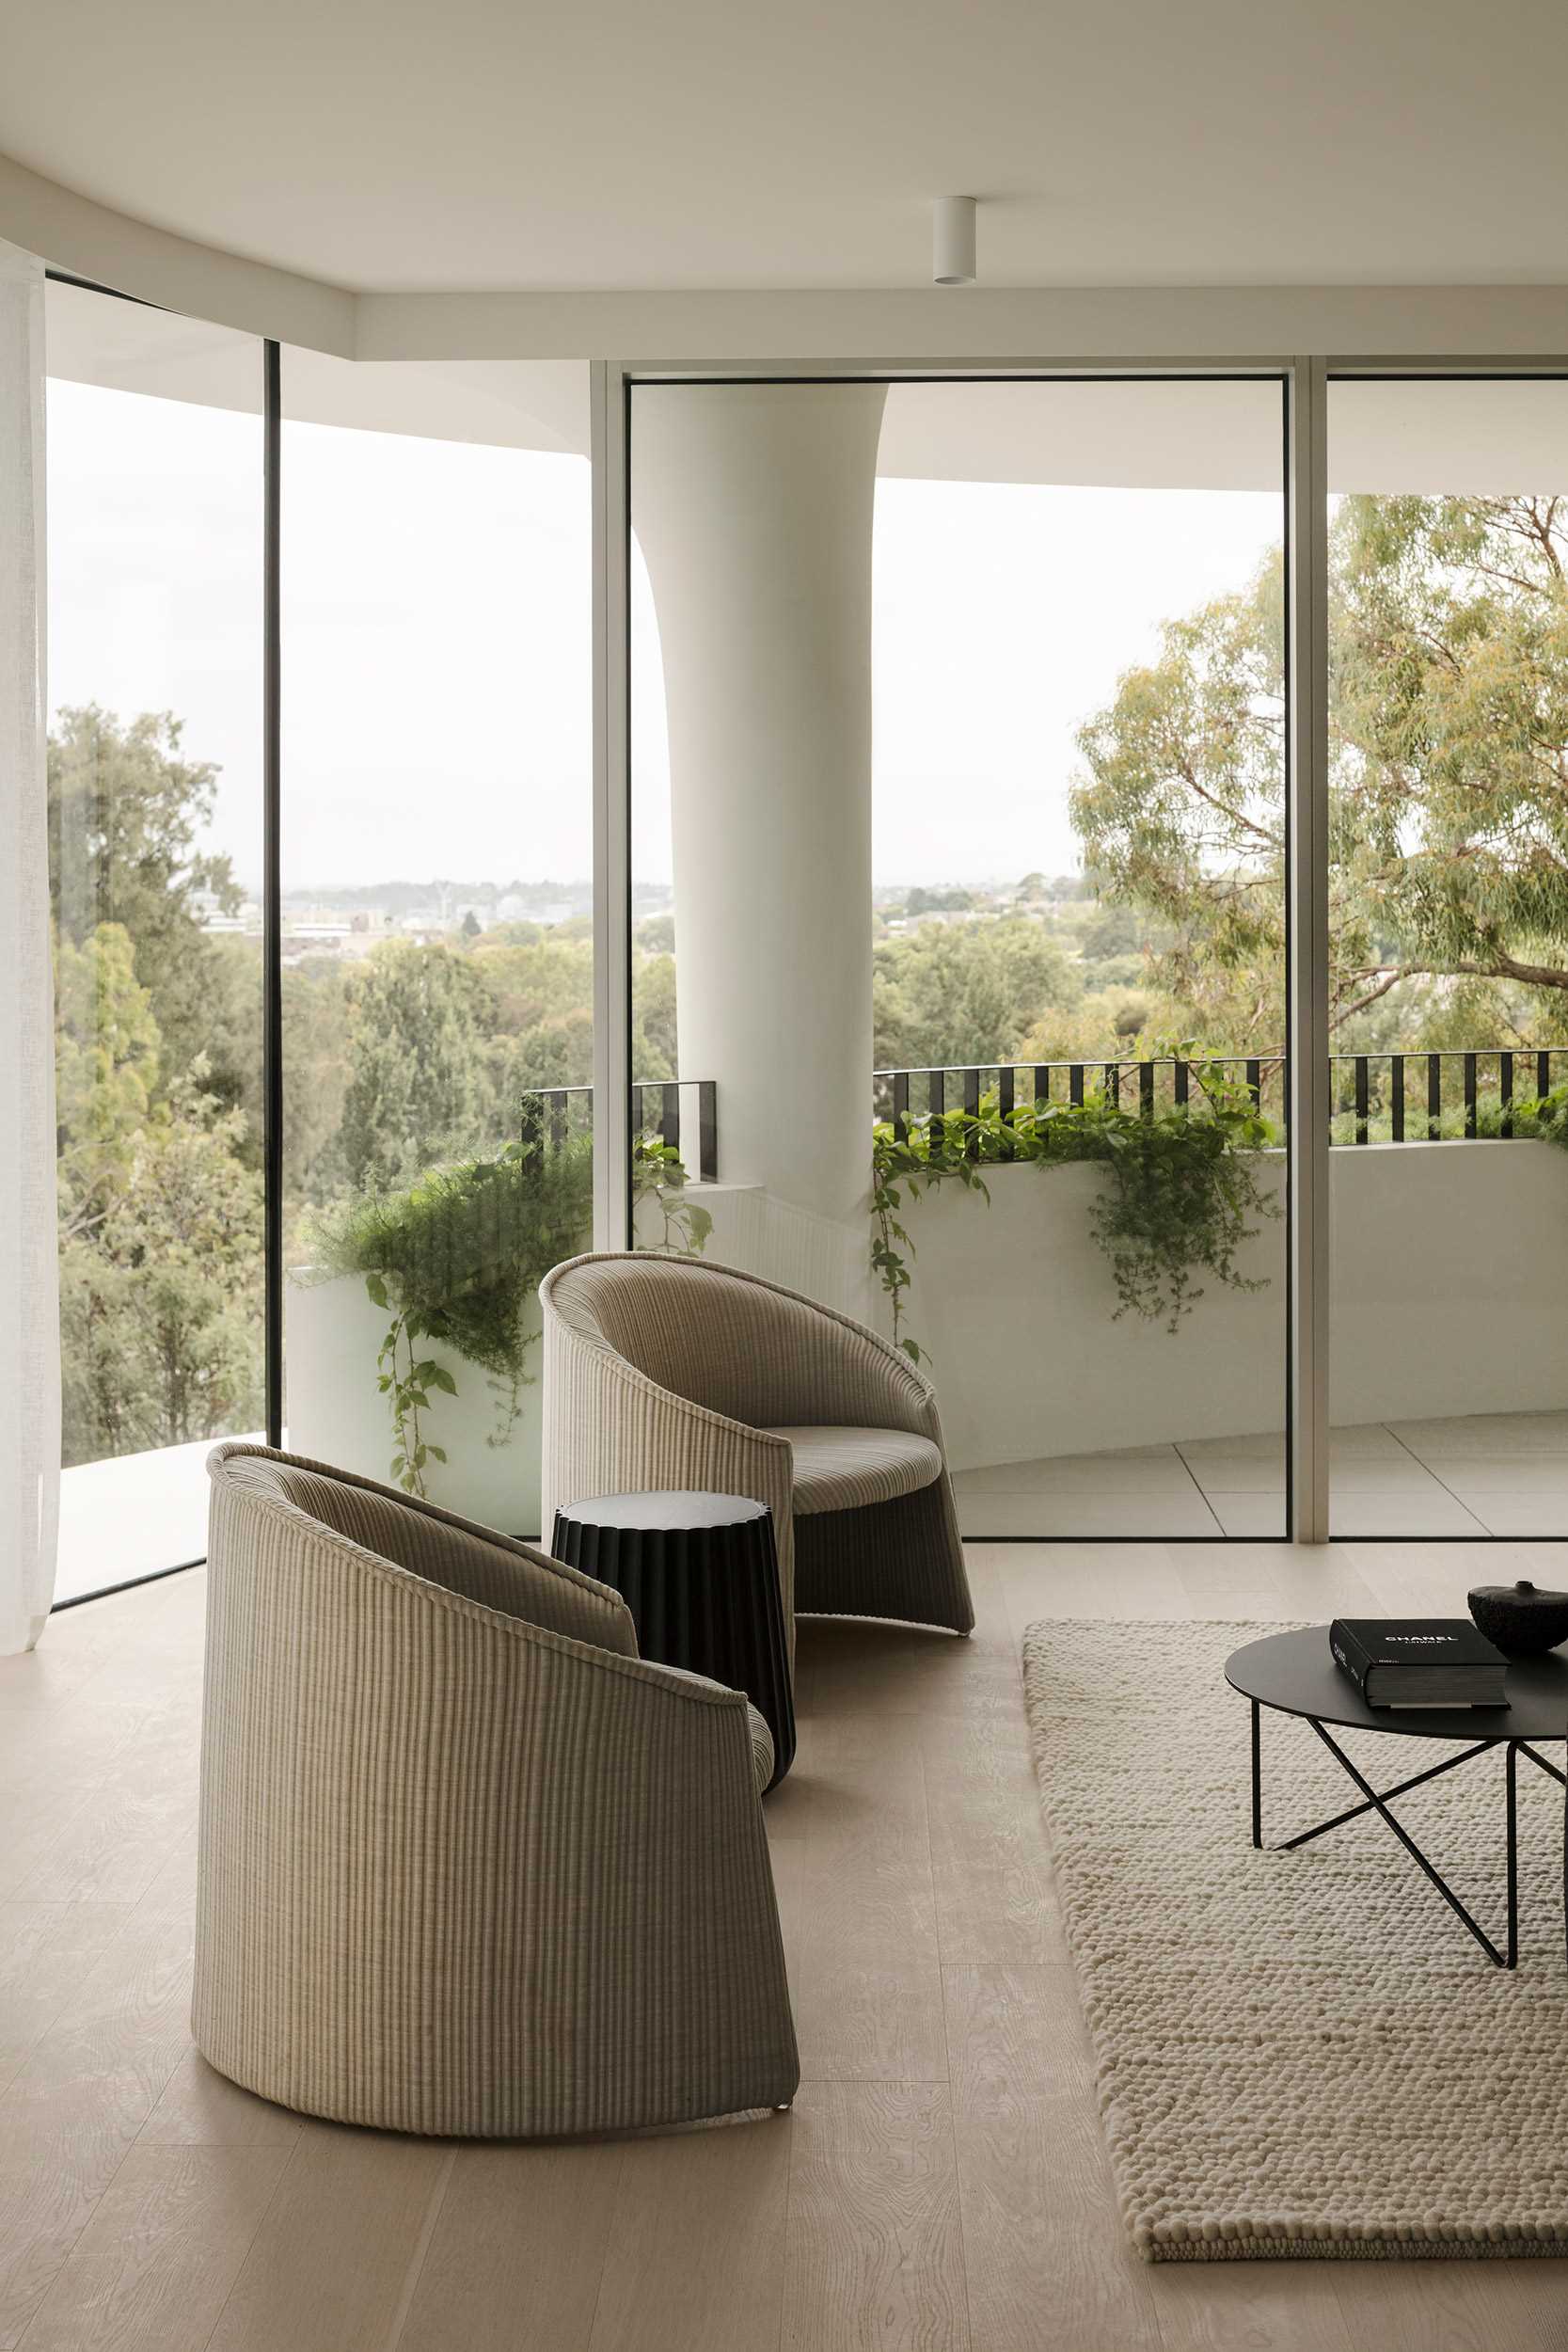 A modern apartment includes floor-to-ceiling windows, a curved terrace, a view of the structural fluted columns.